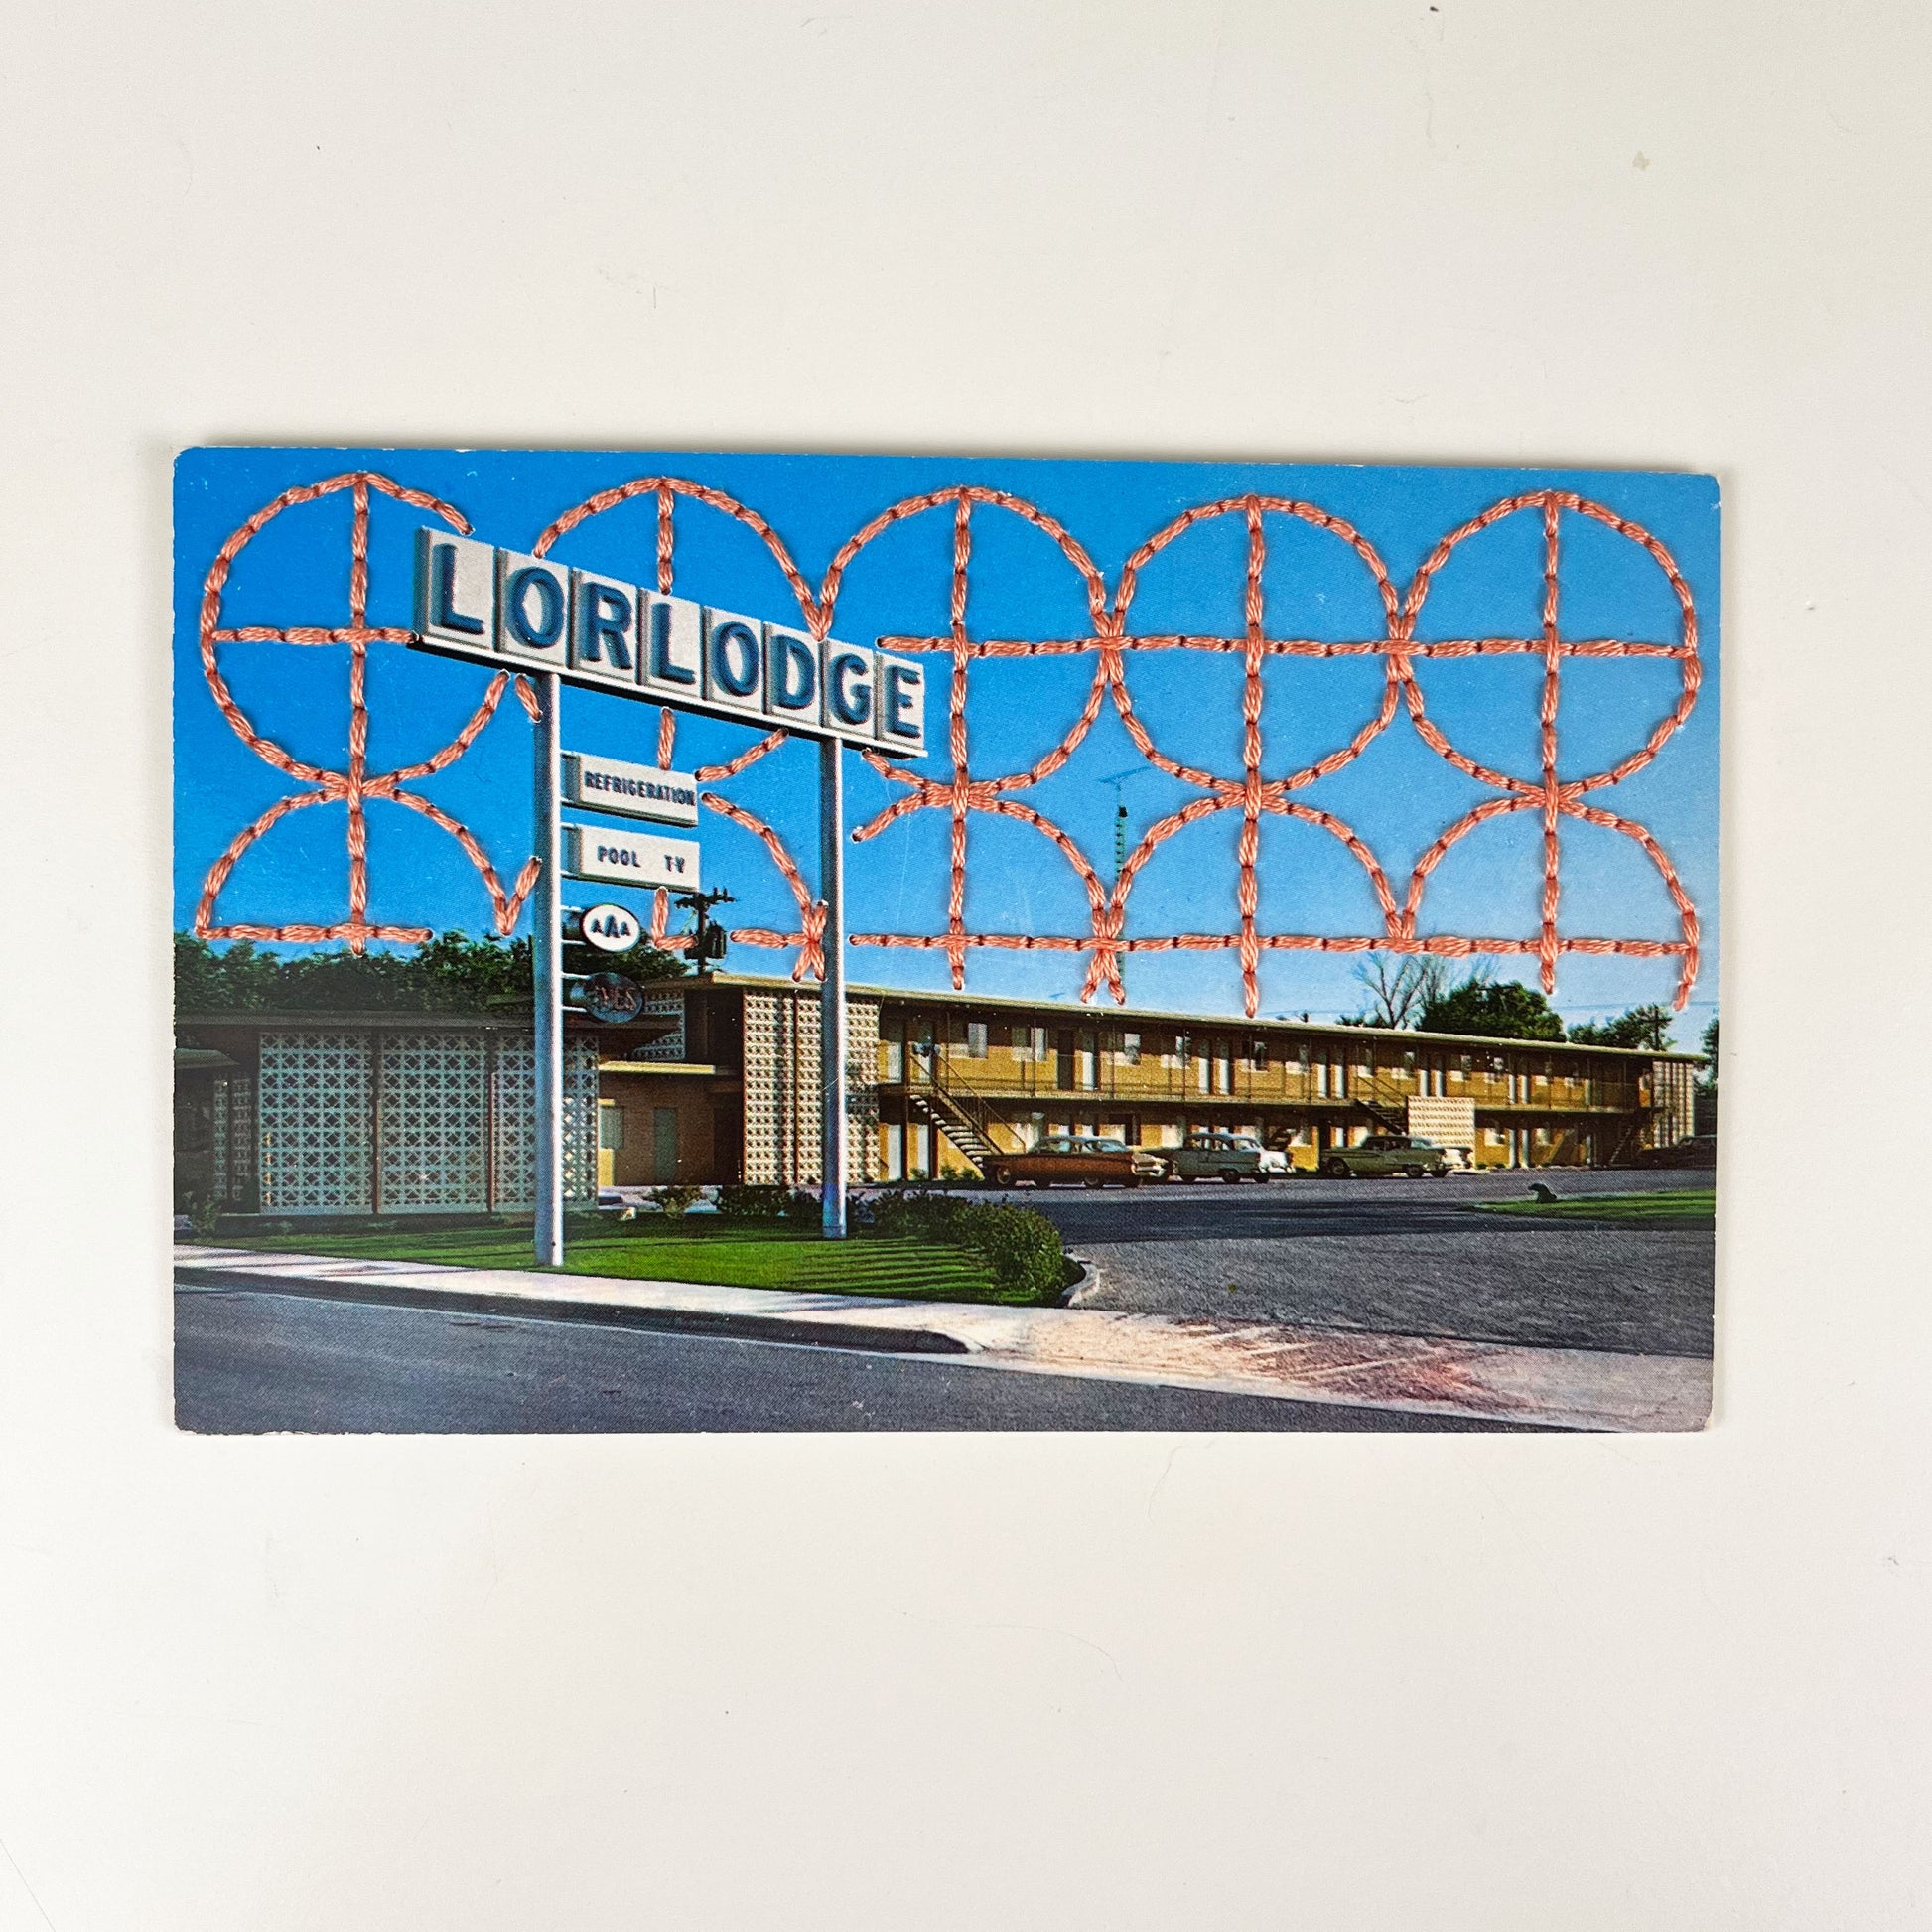 an old postcard of a motel called Lorlodge, with a hand embroidered circle and line design like breeze blocks in peach stitched in the background on the sky only, the postcard is sitting on a white background